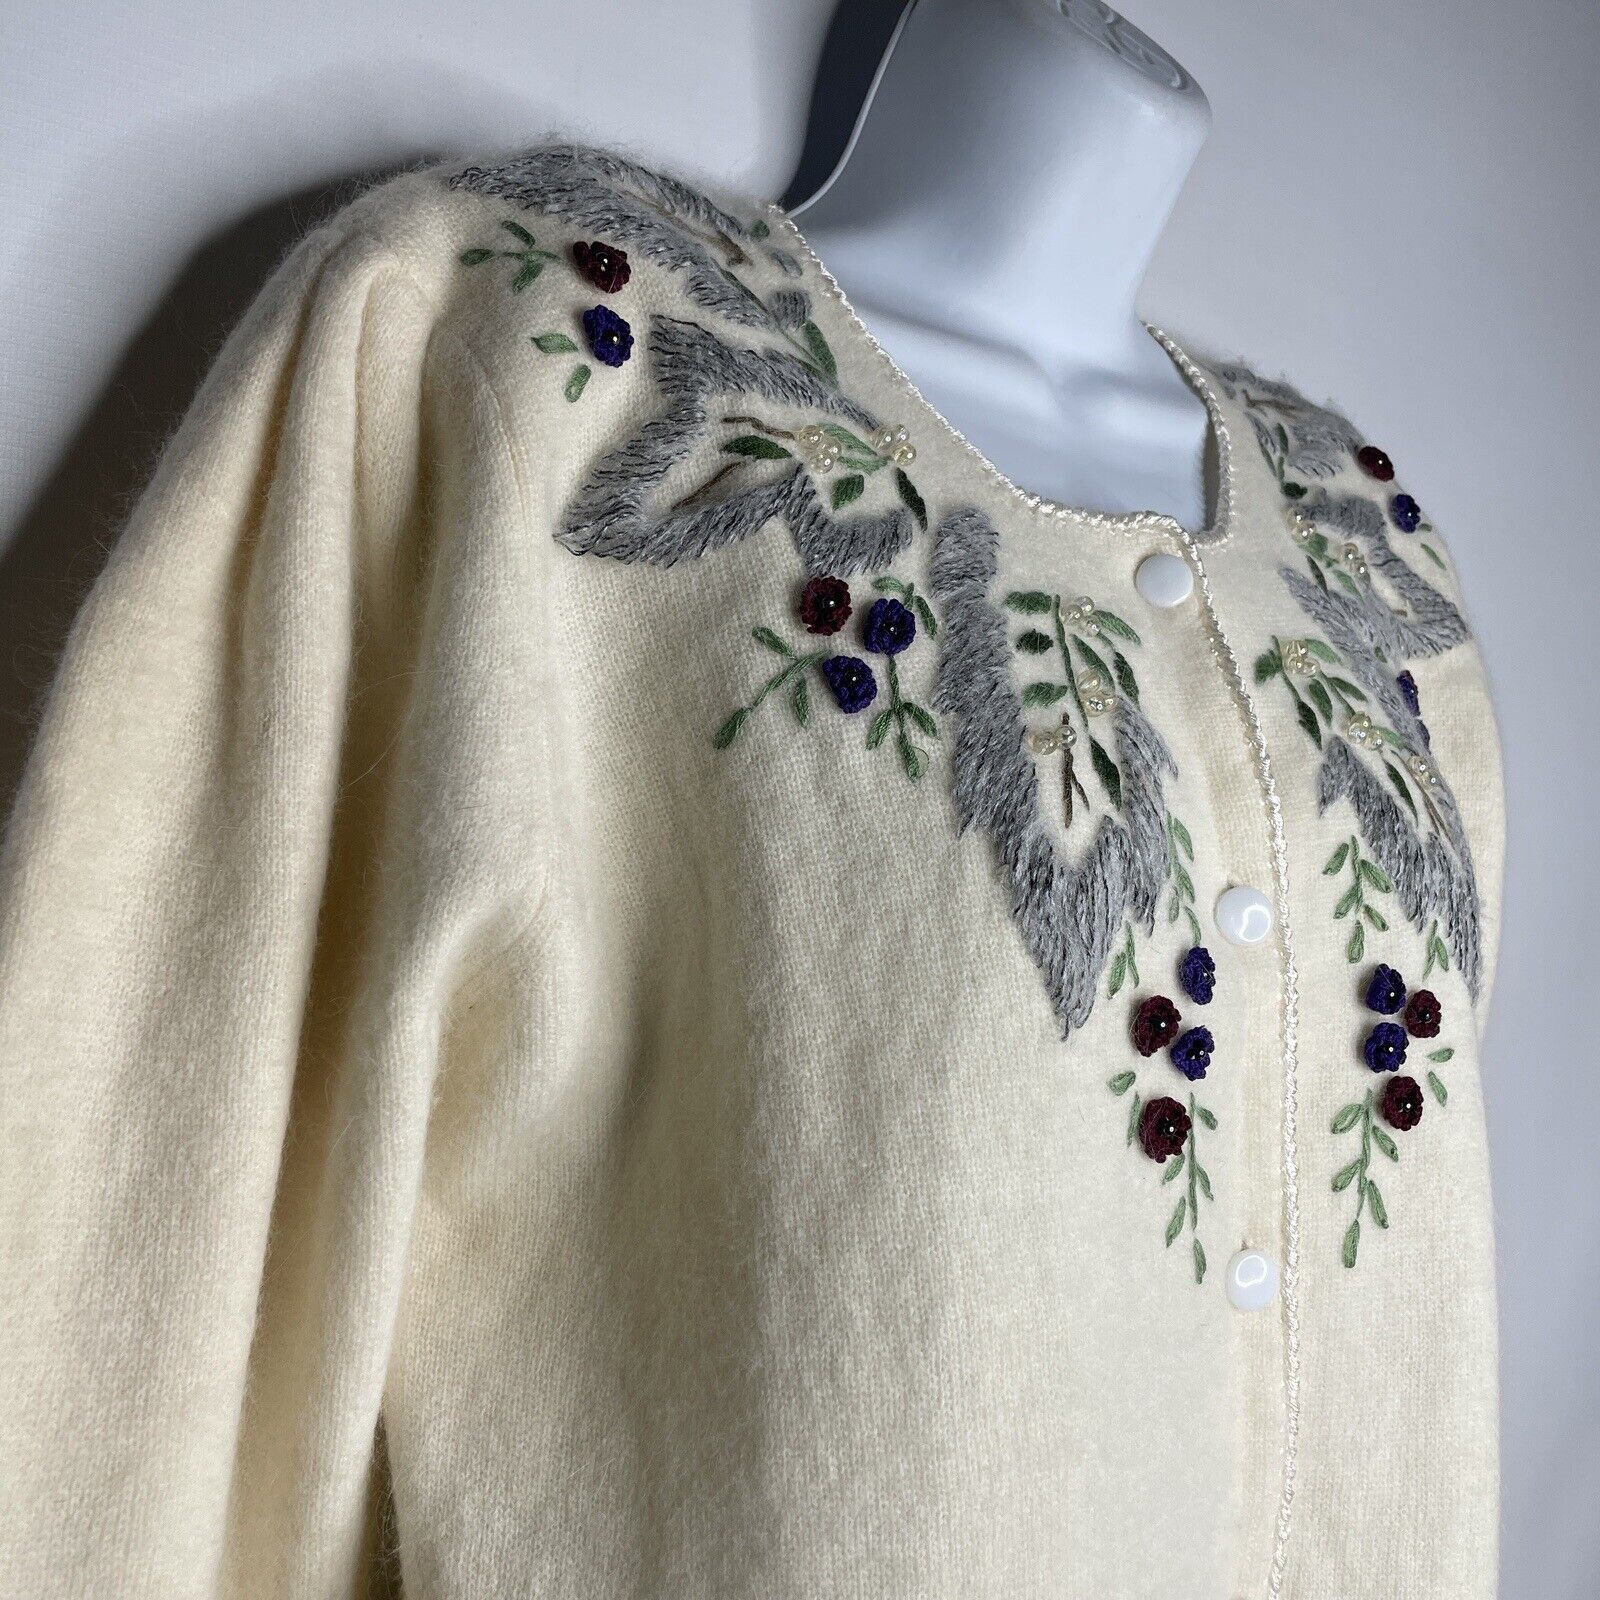 Vintage 80s Ivory Floral Embroidered Beaded Fuzzy Cardigan Sweater Size L / US 10 / IT 46 - 4 Thumbnail